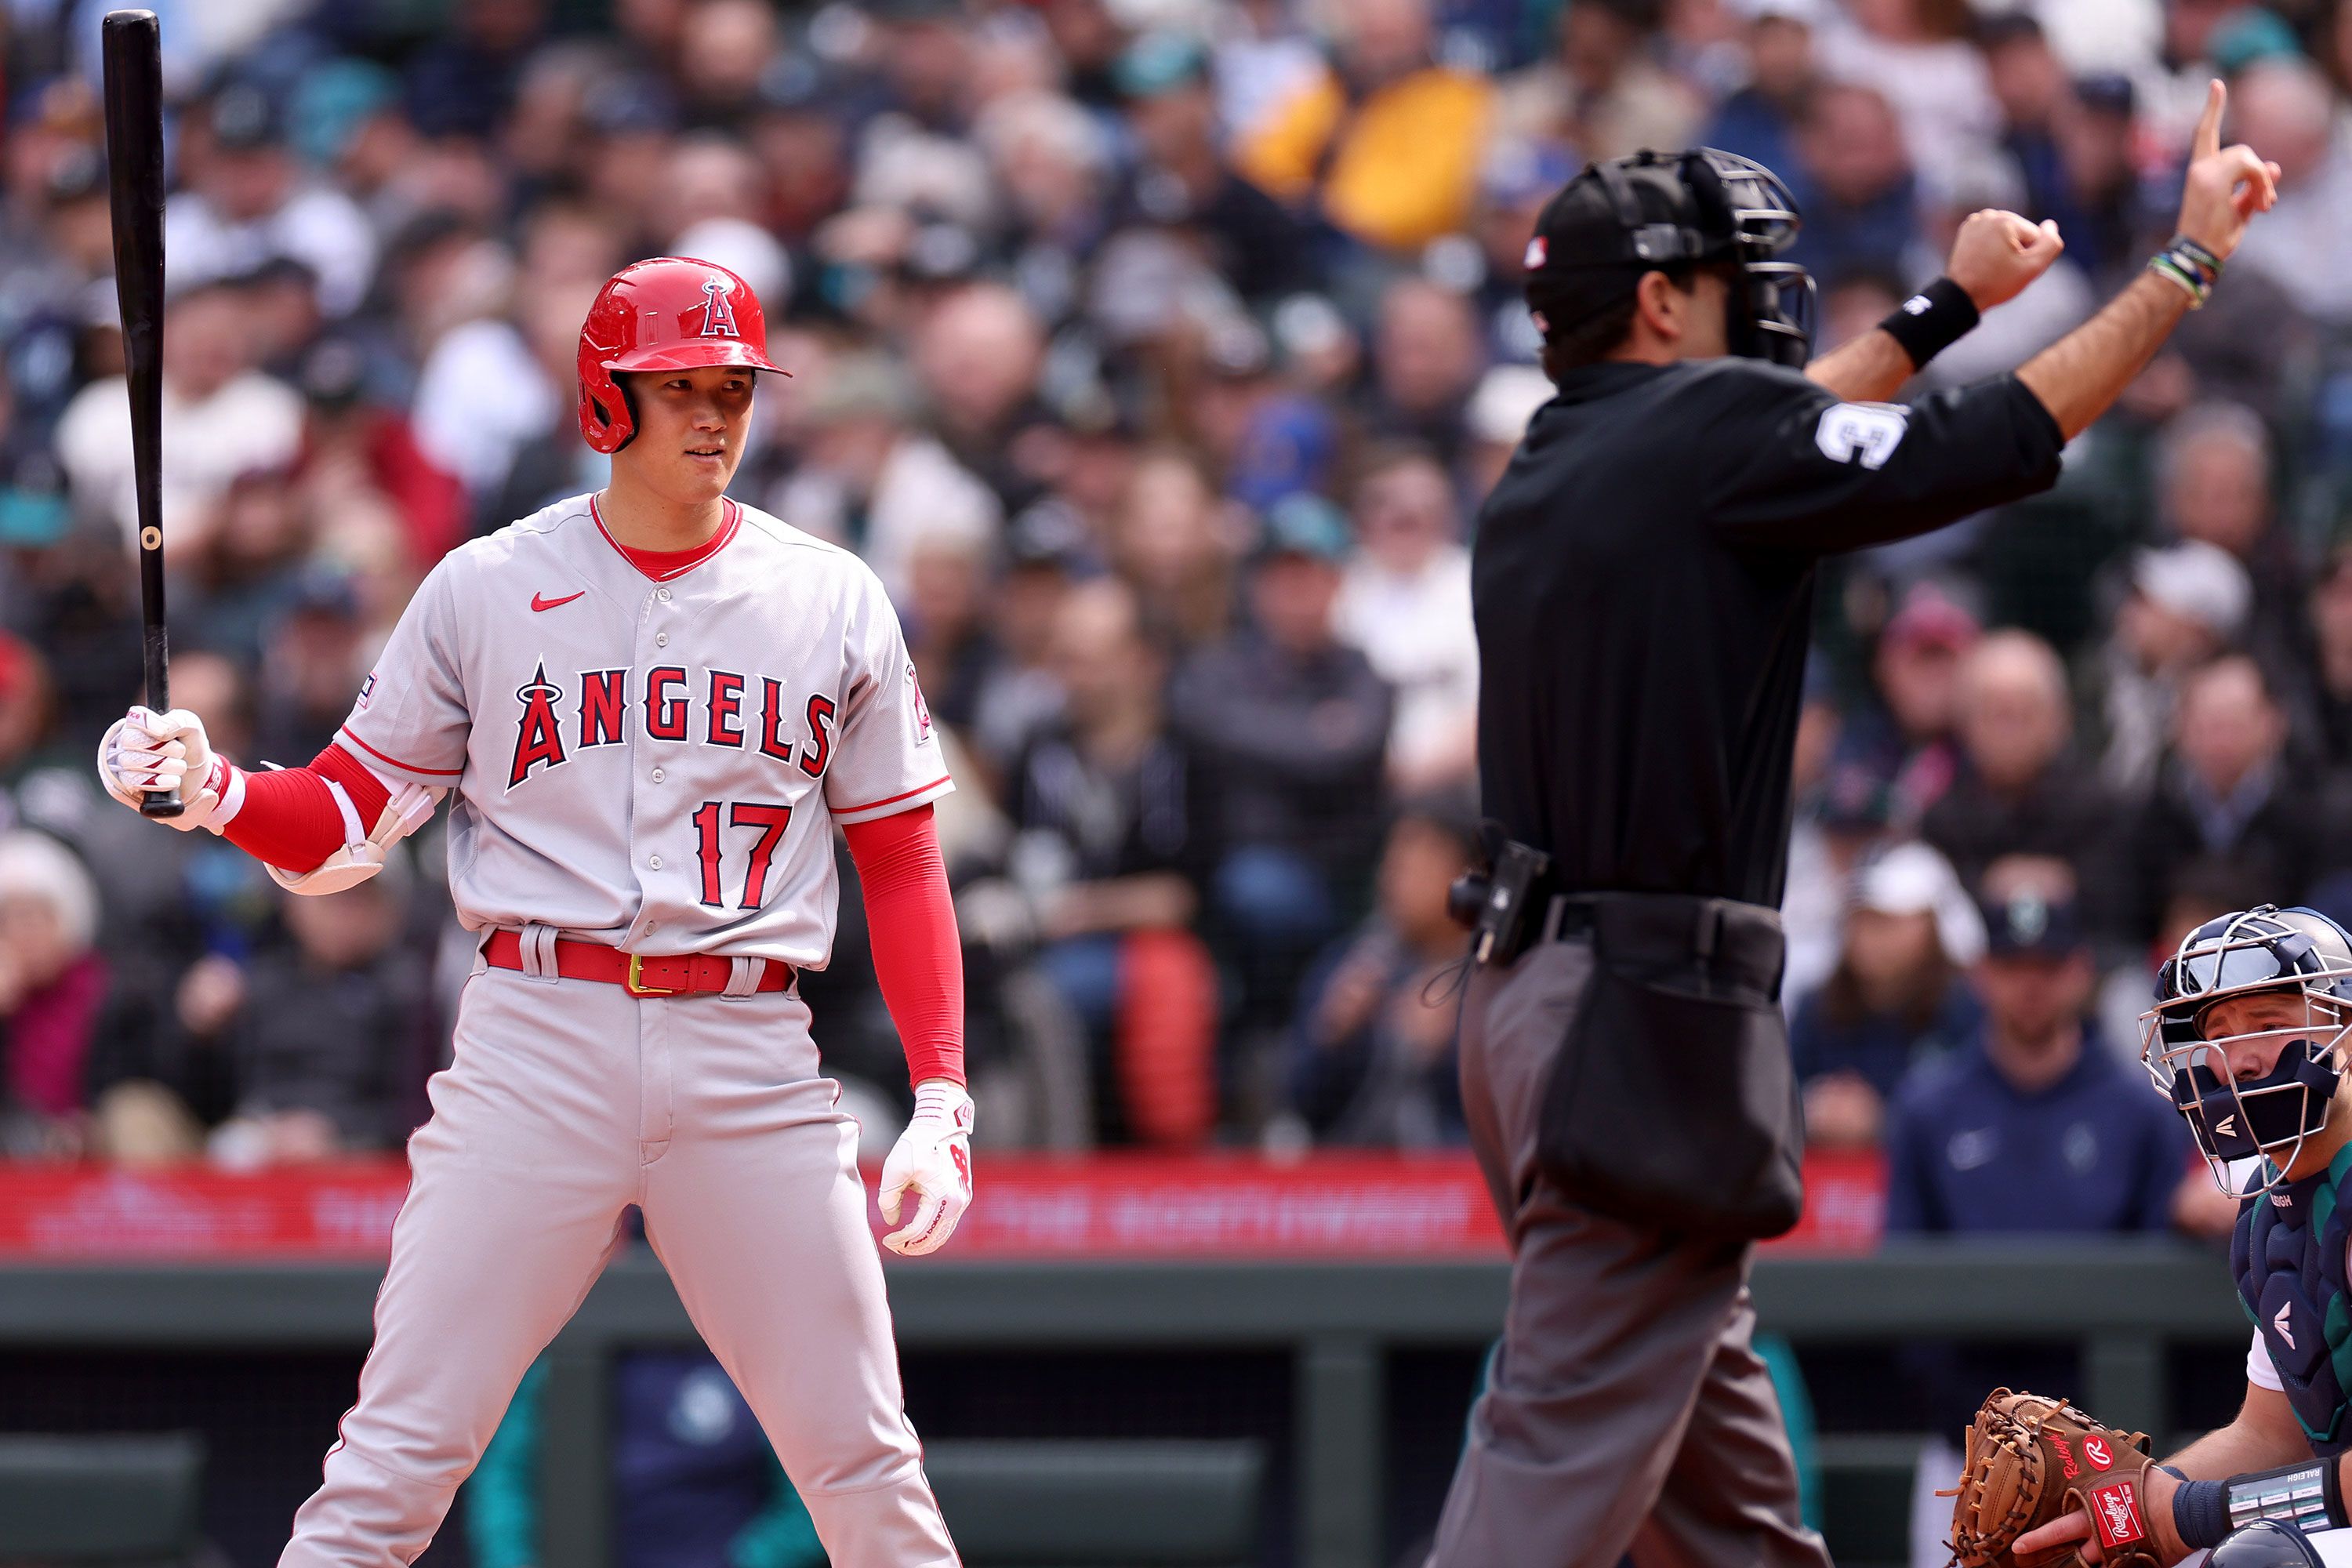 Shohei Ohtani: Los Angeles Angels star gets two pitch clock